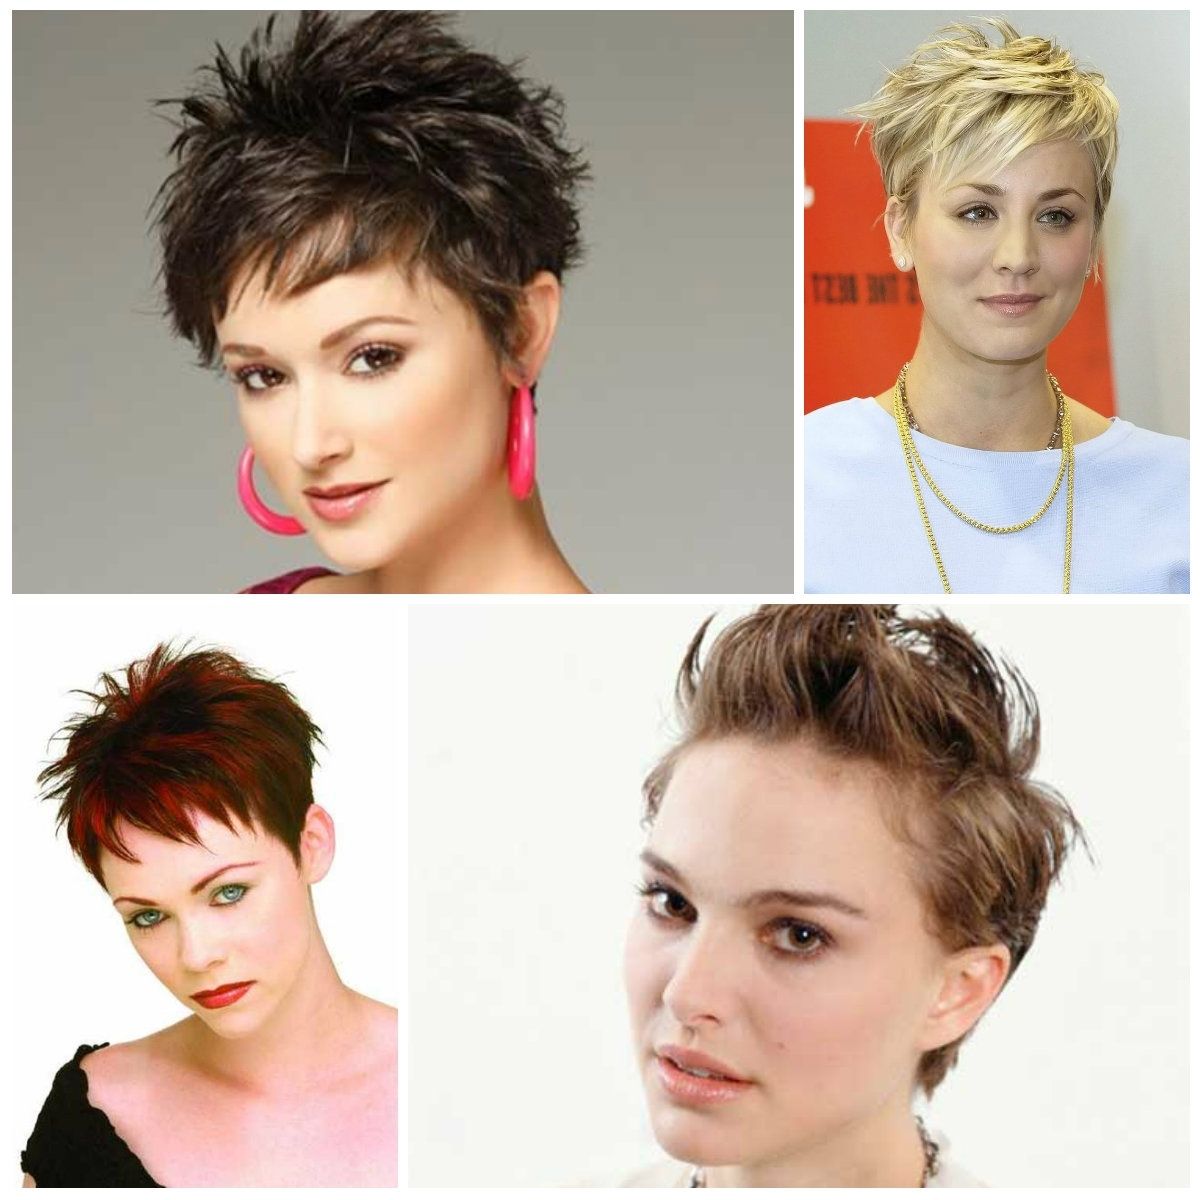 Hottest Spiky Pixie Hairstyle Ideas – Haircuts And Hairstyles For With Current Styling Pixie Hairstyles (View 10 of 15)